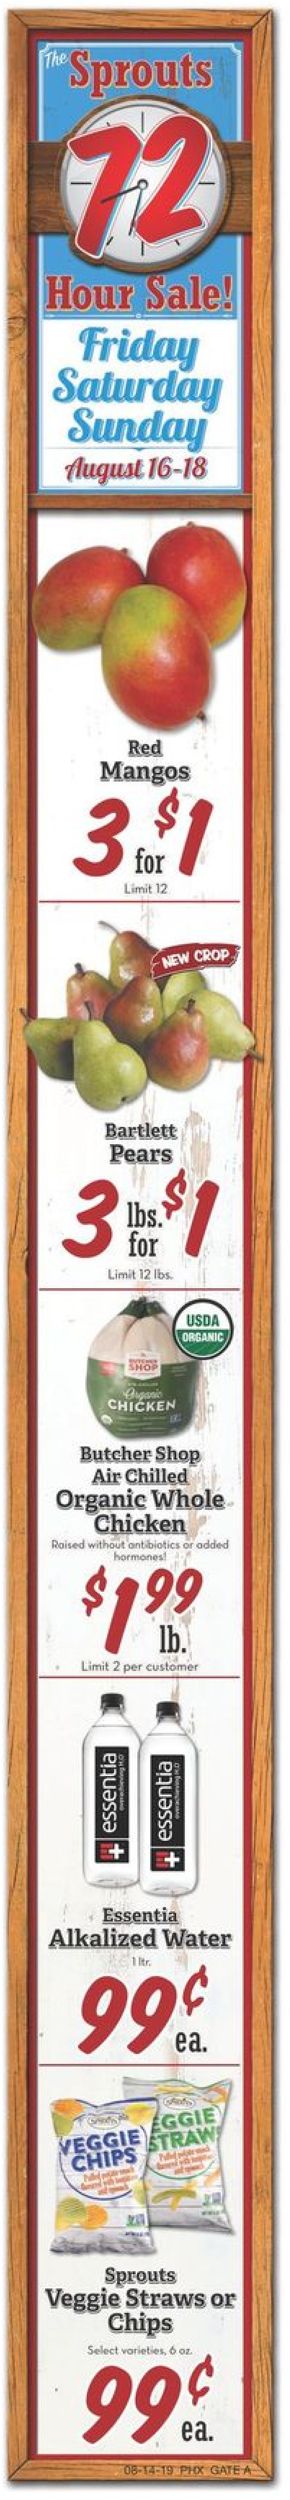 Sprouts Weekly Ad Circular - valid 08/14-08/21/2019 (Page 2)